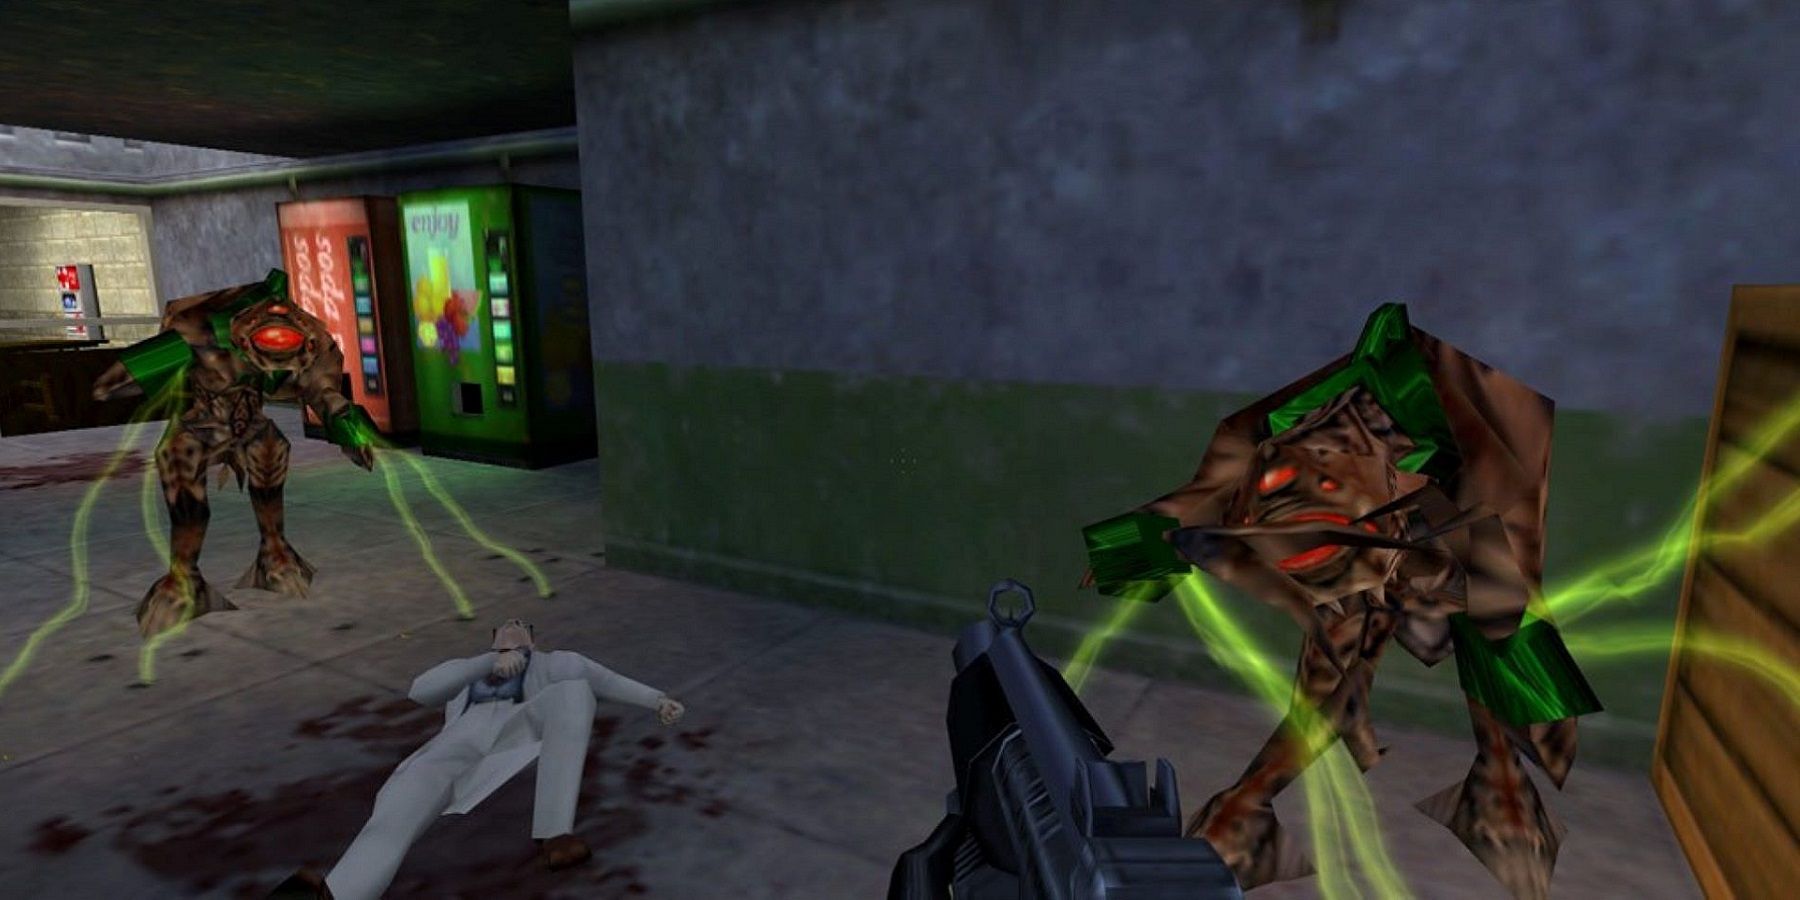 Screenshot from Half-Life showing a couple of vortigaunts about to attack the player.